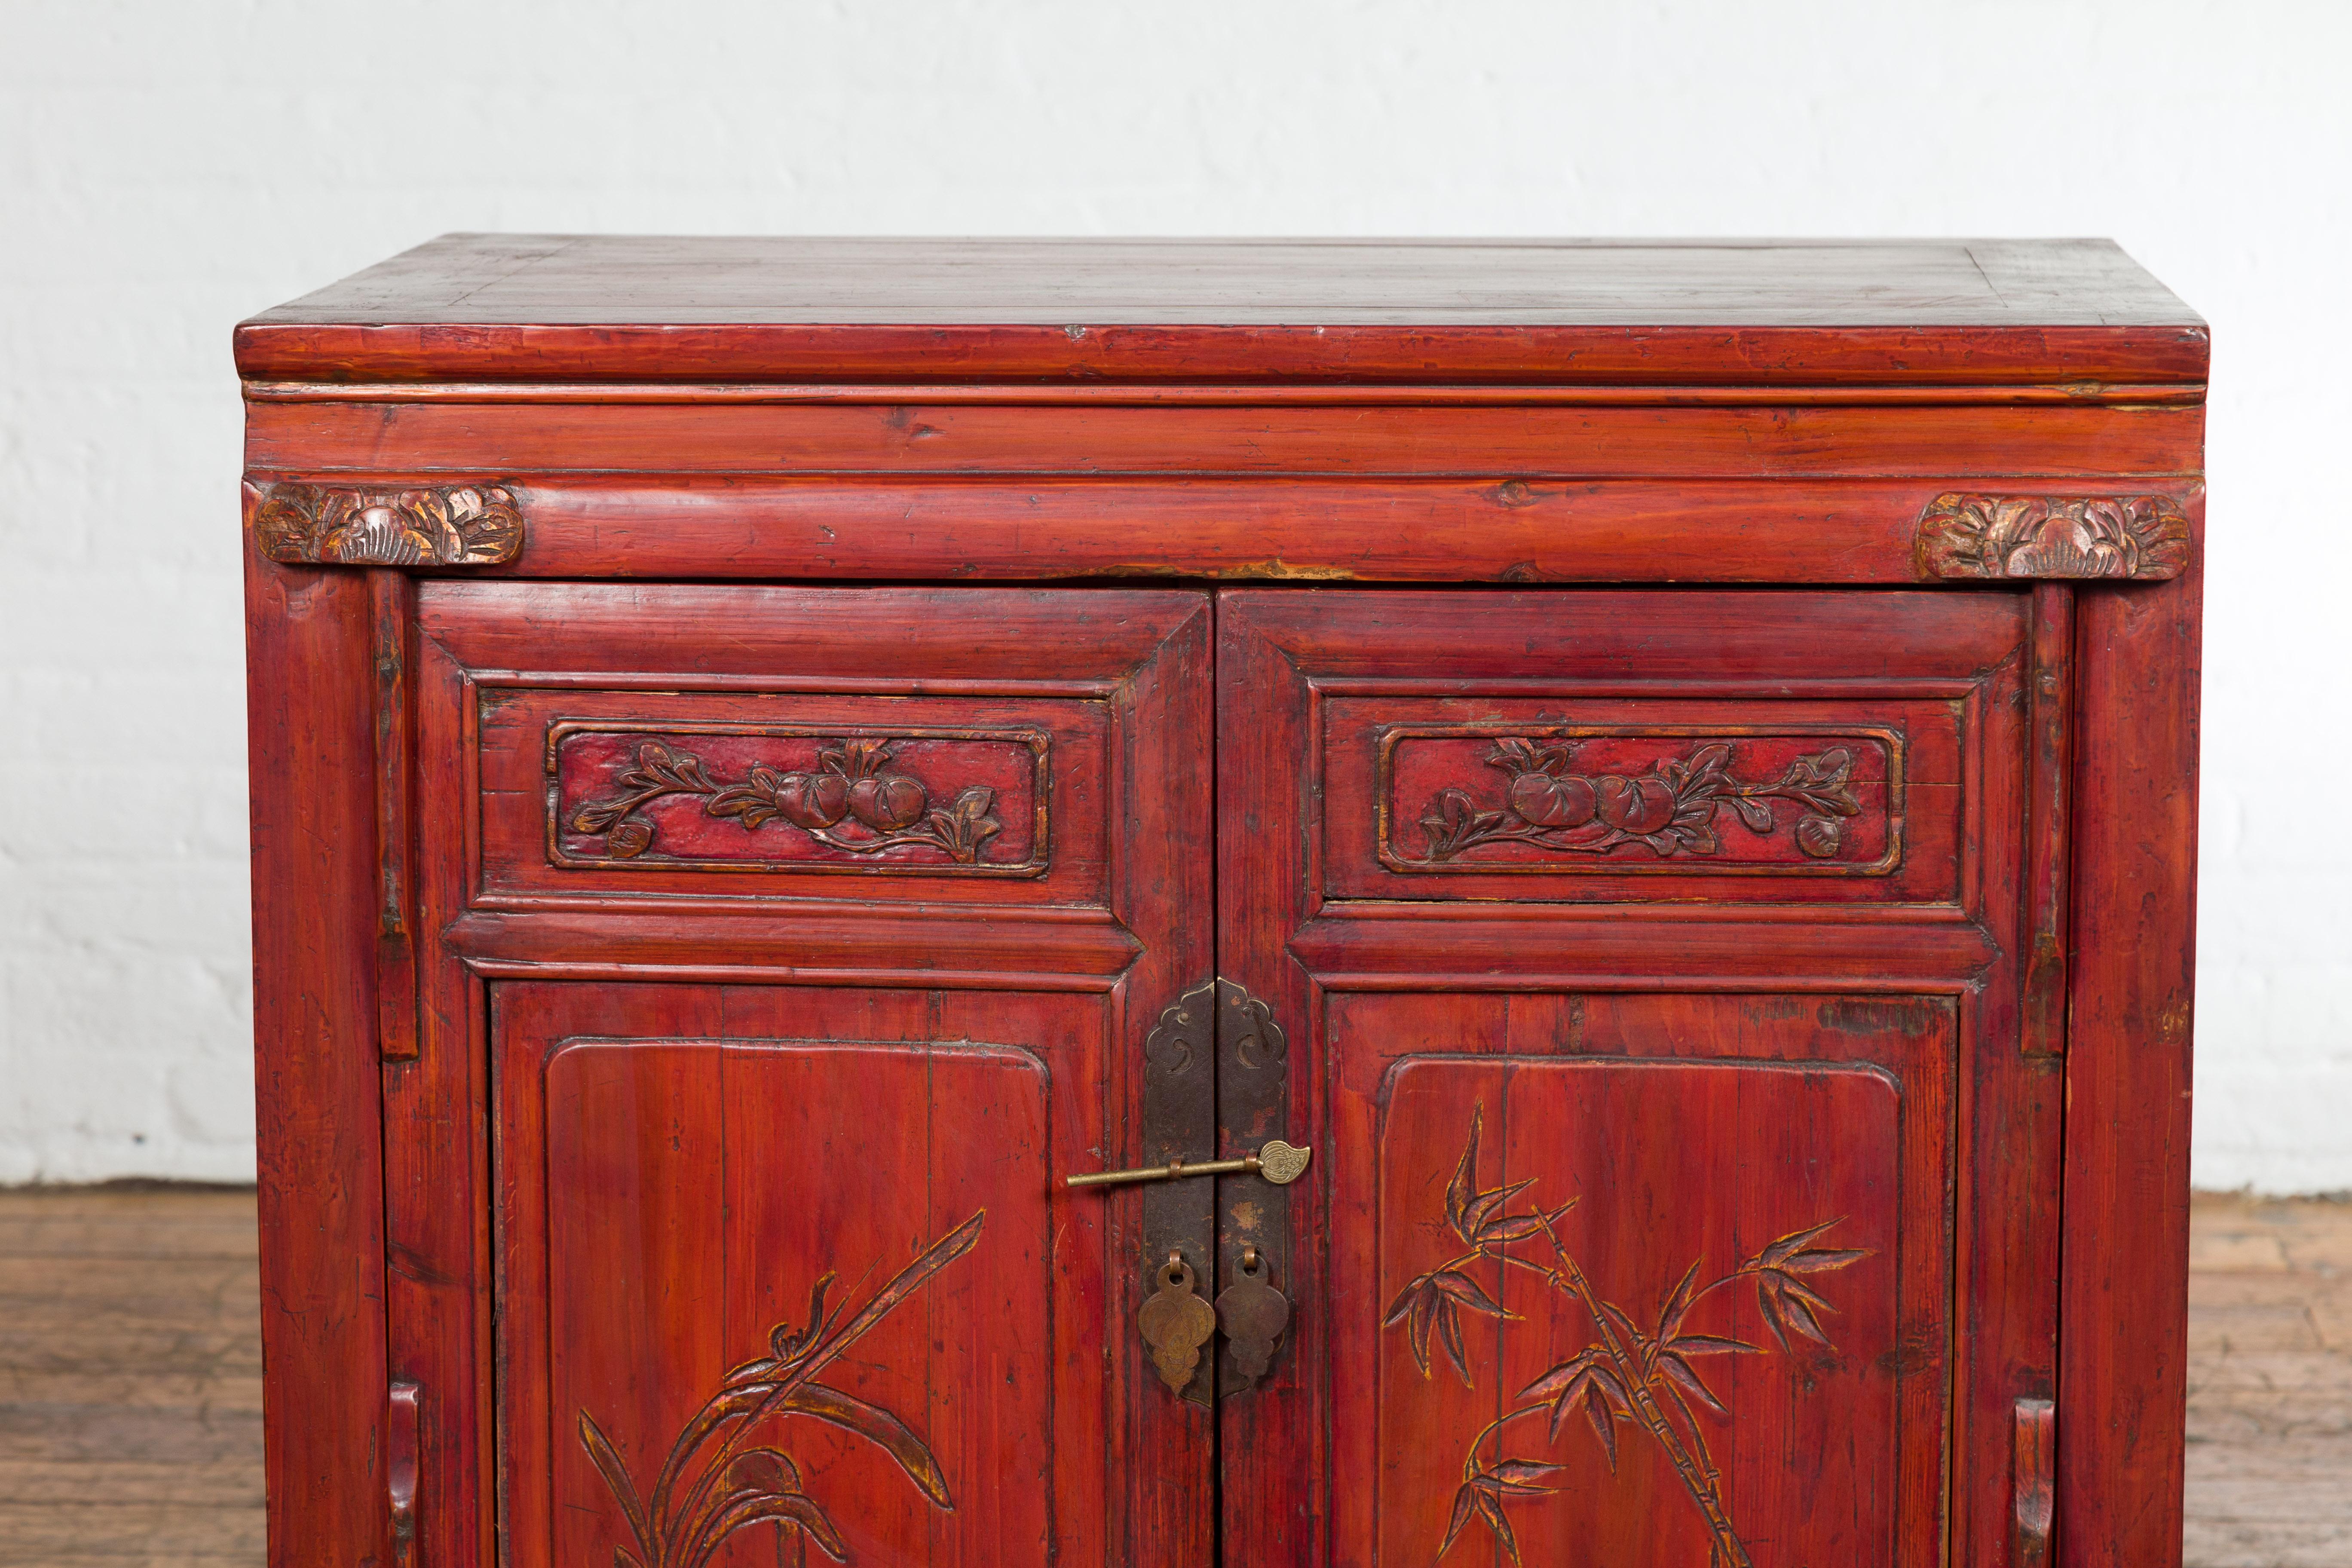 20th Century Chinese Red Lacquer Late Qing Dynasty Bedside Cabinet with Carved Décor For Sale